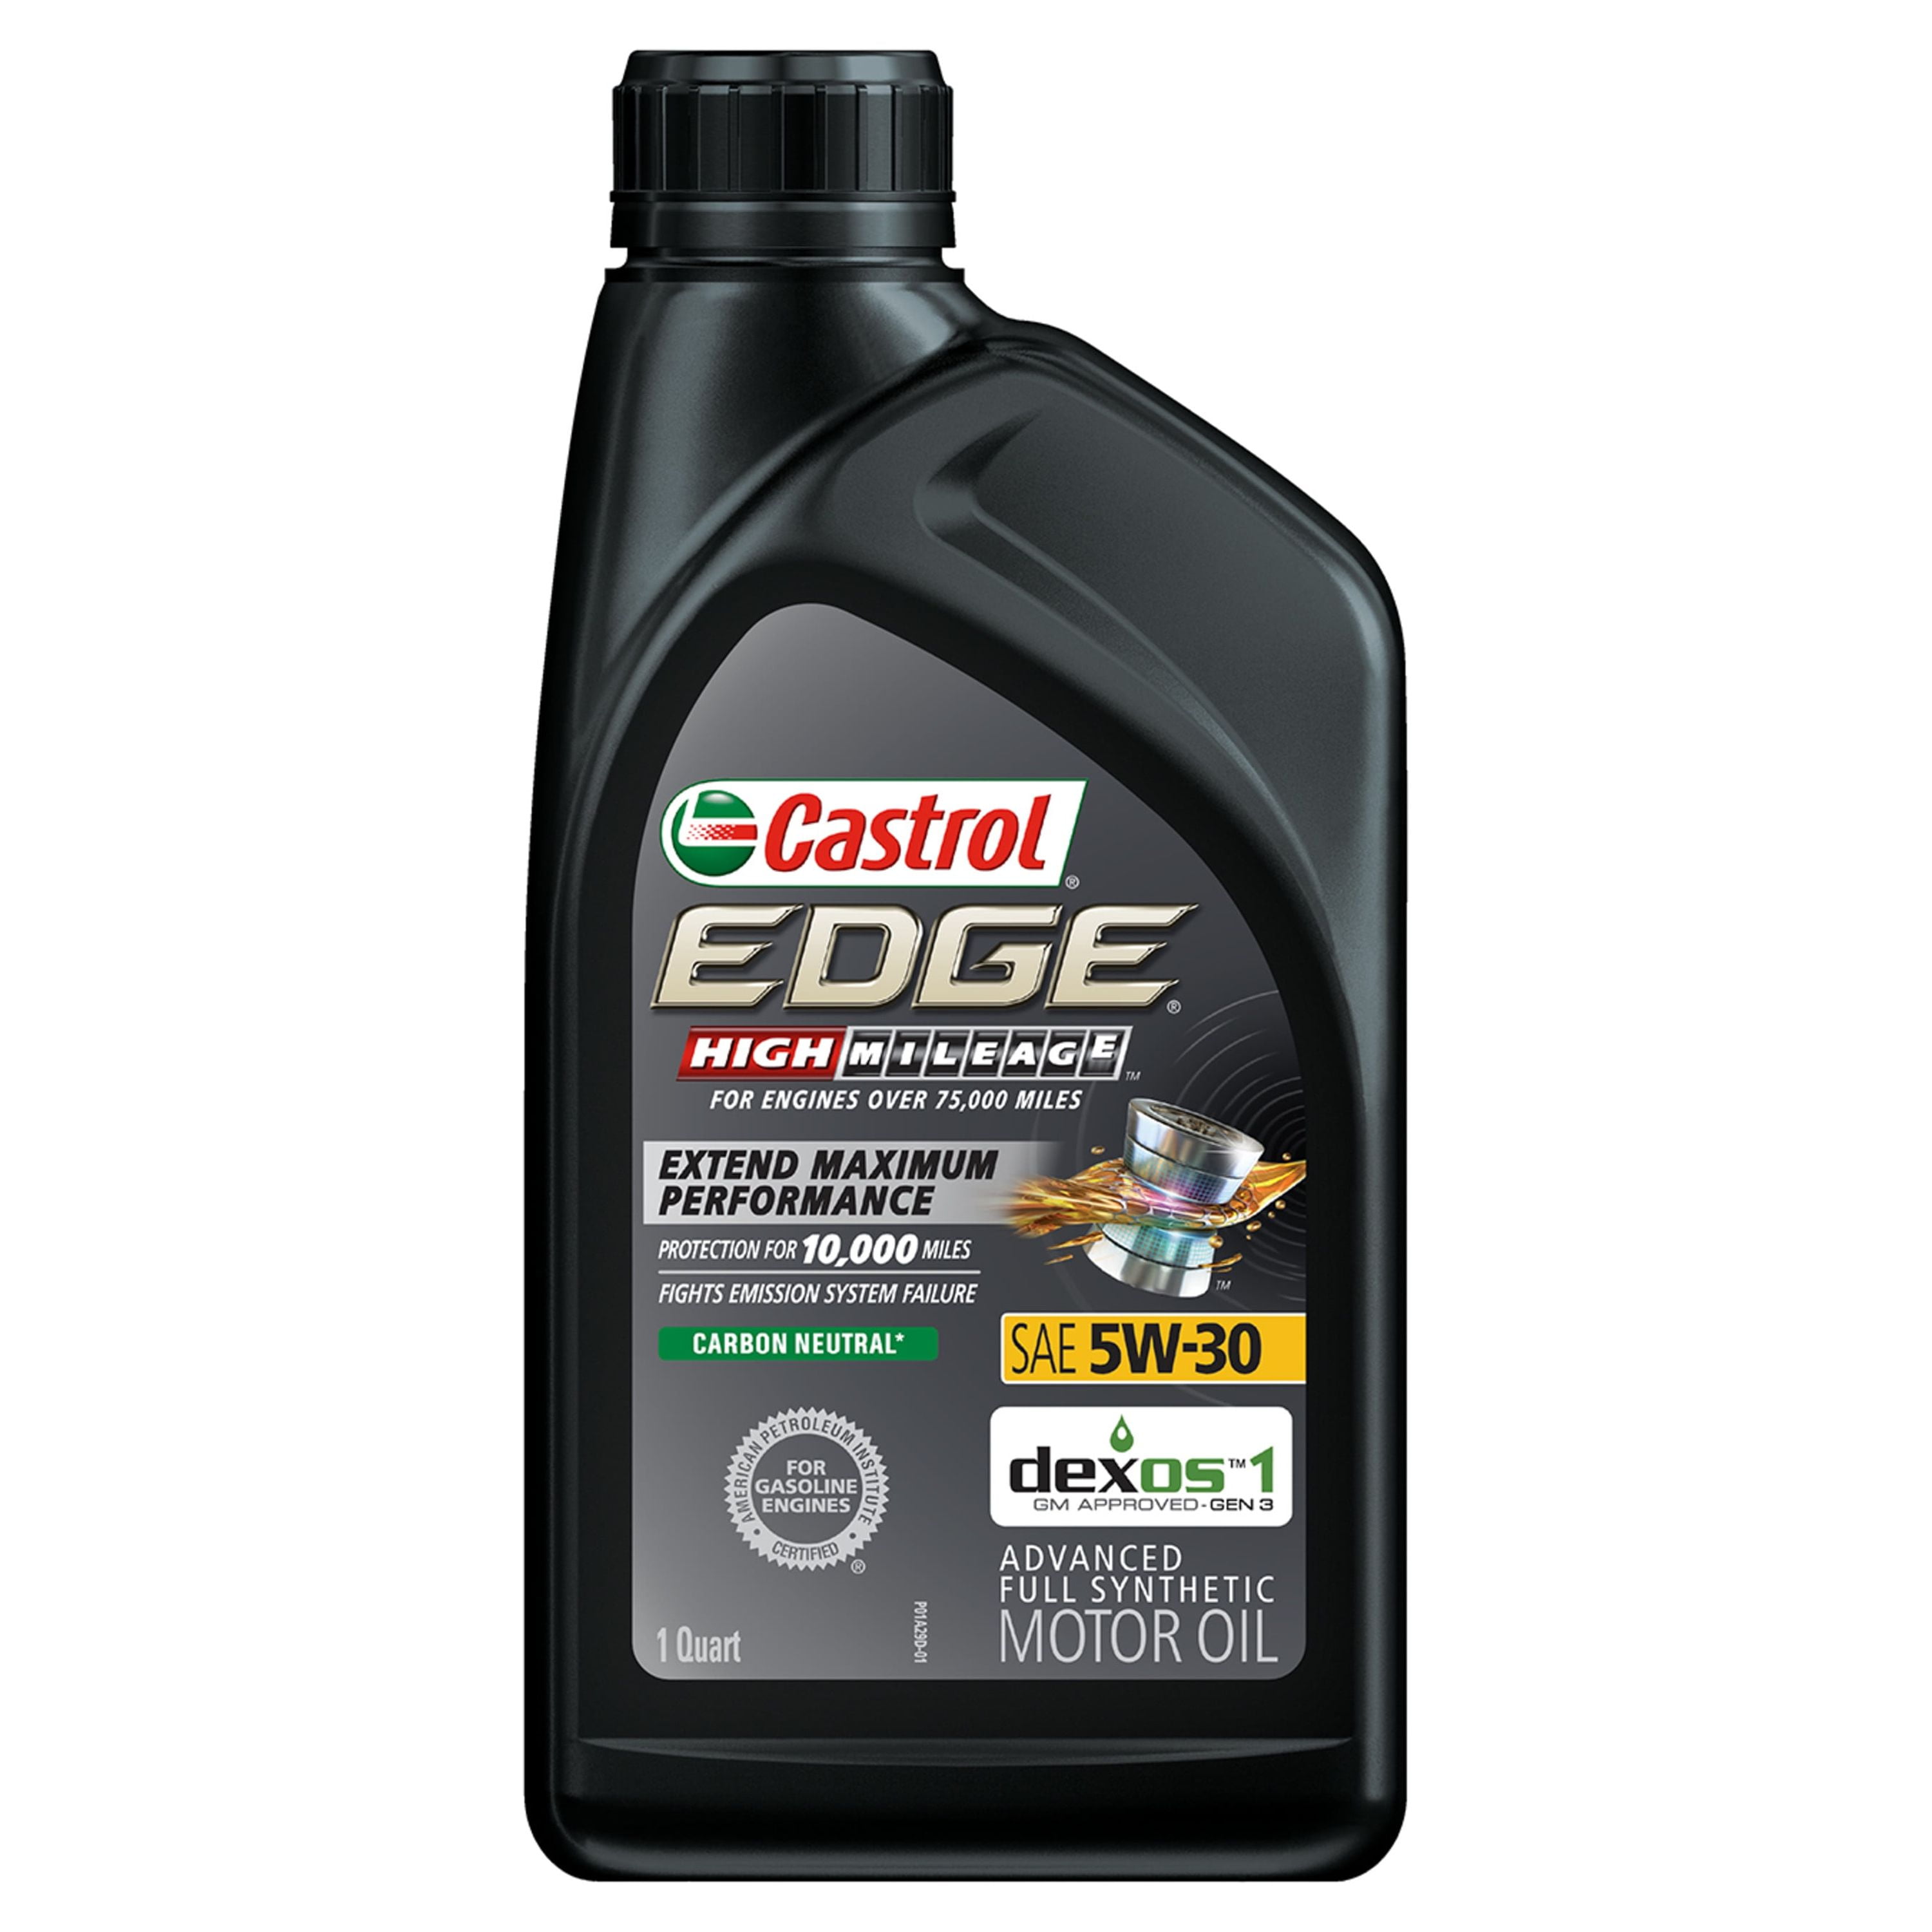 Just changed my oil. Came across this at Walmart. I've never seen this  there before and used it. Prior oil change I used regular Castrol 5w30.  Only purchased this because it labeled